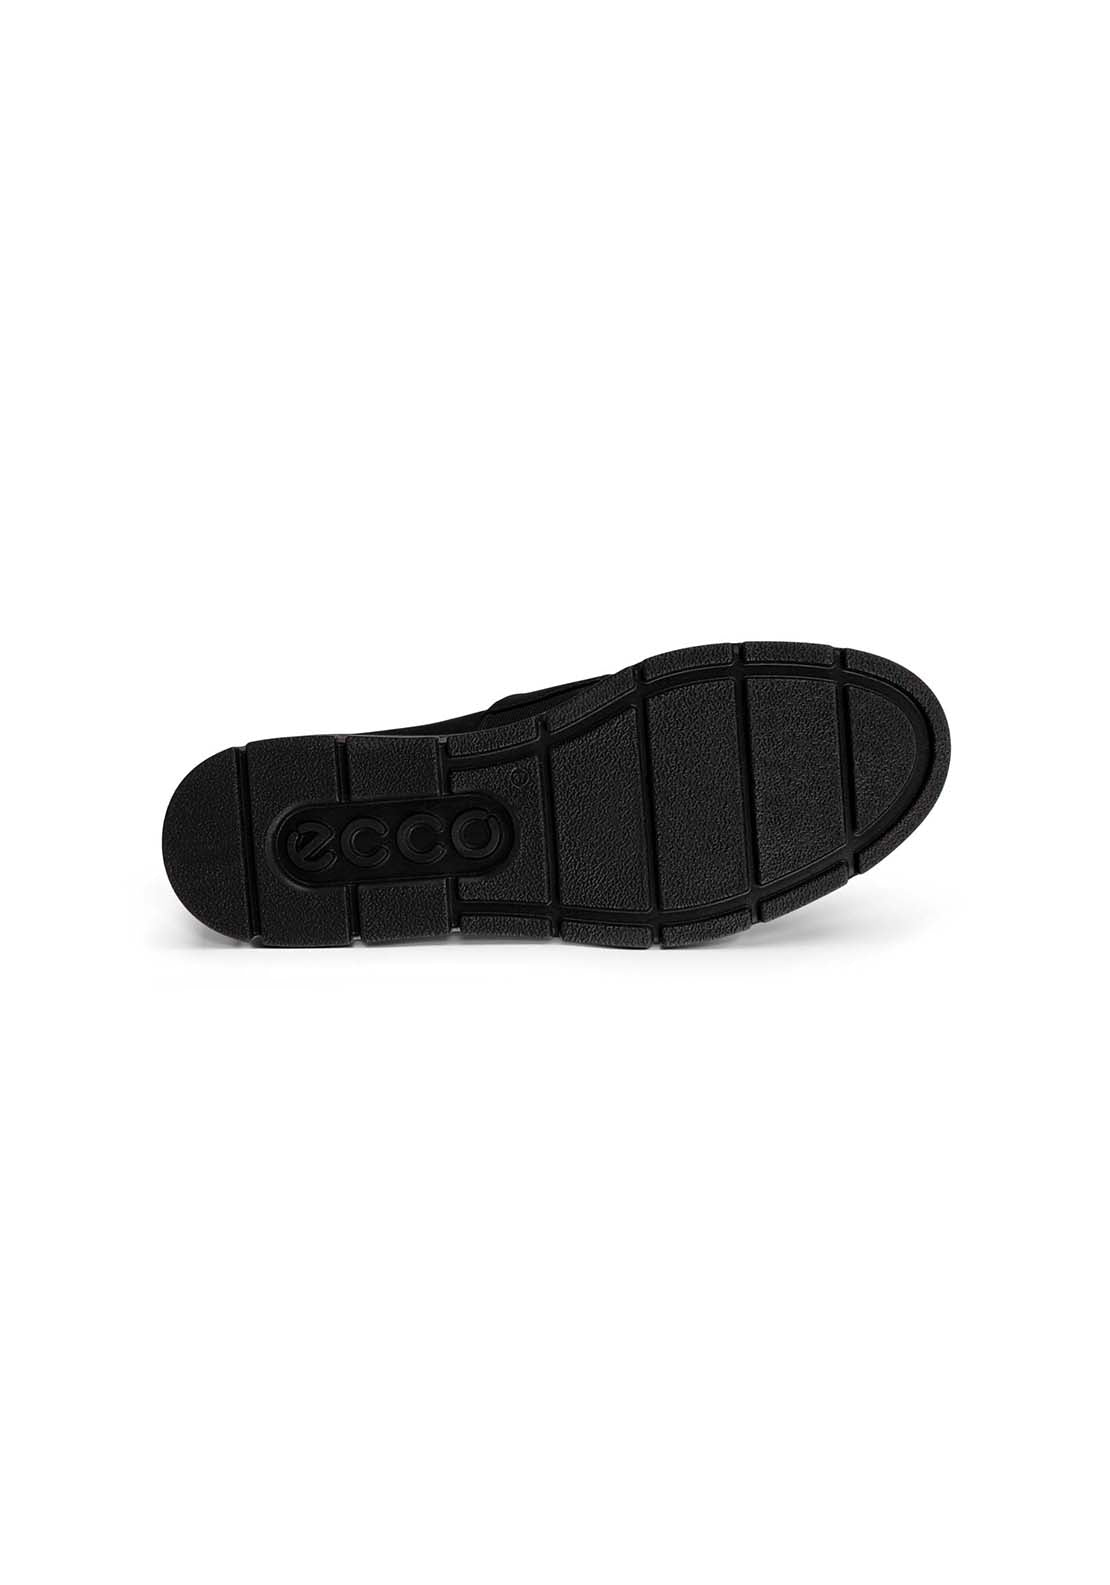 Ecco Bella Casual Slip on Shoe 2 Shaws Department Stores